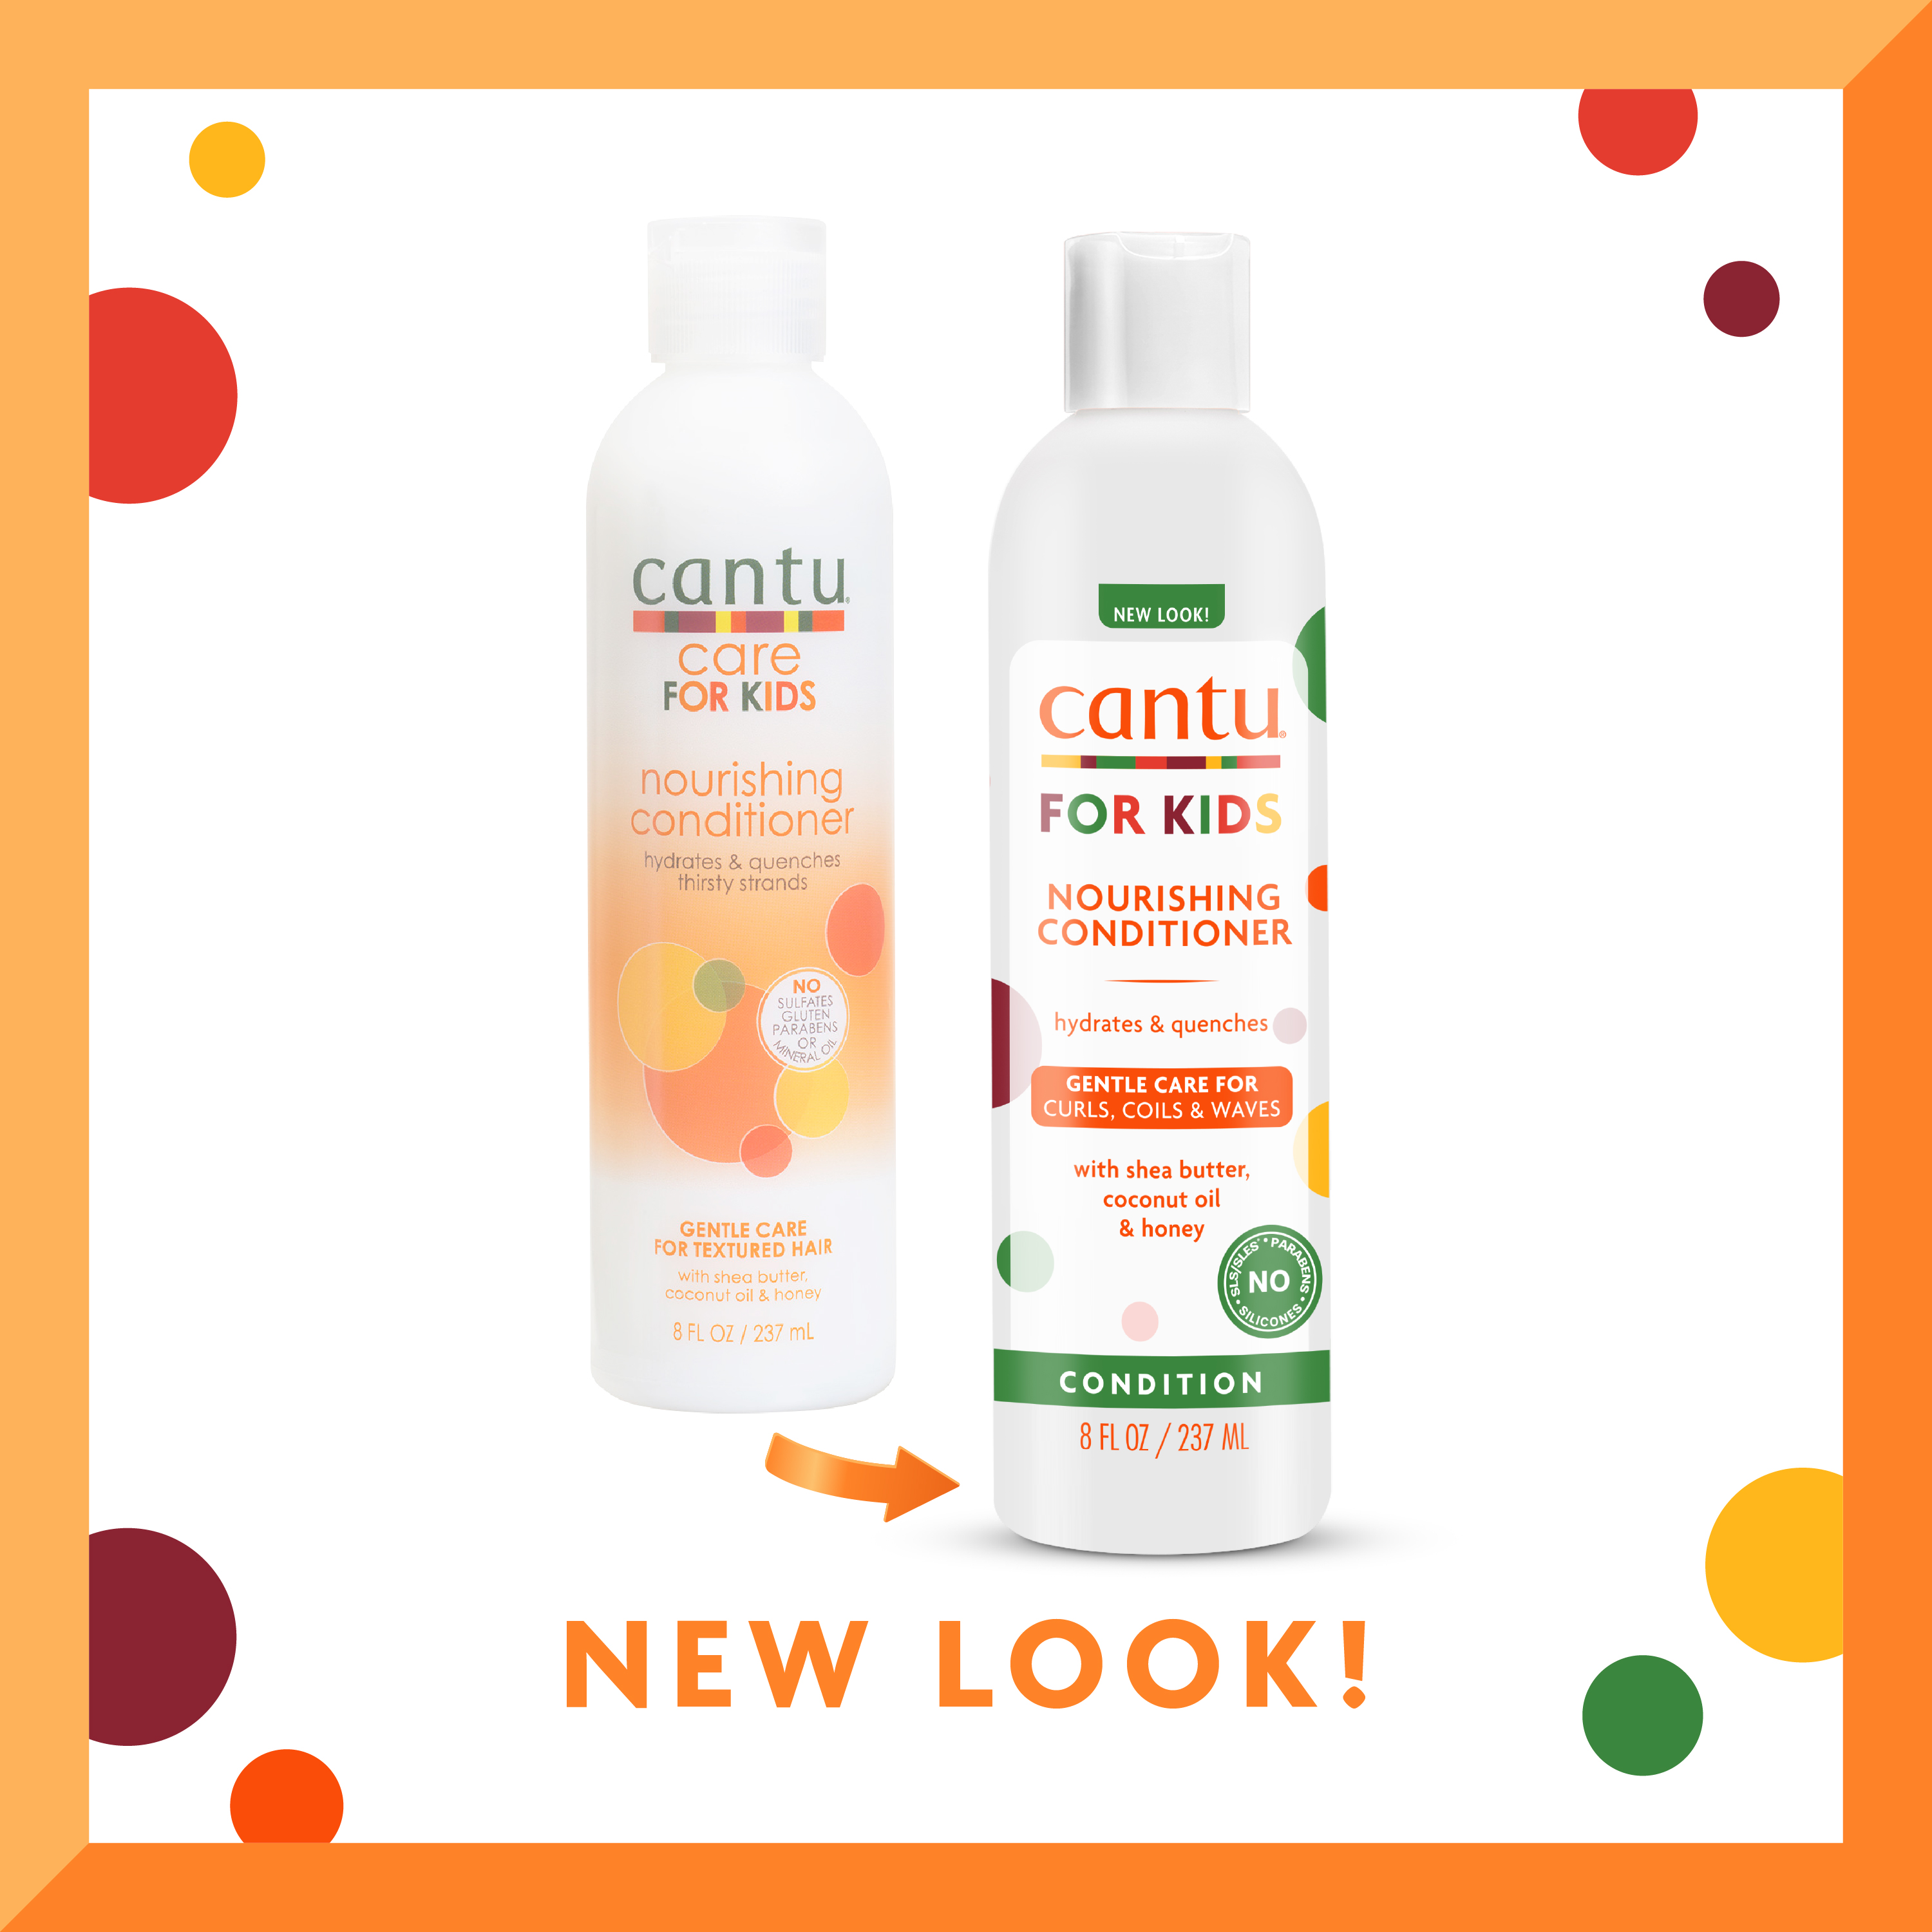 Cantu Care for Kids Nourishing Sulfate-Free Conditioner with Shea Butter, 8 fl oz - image 4 of 11